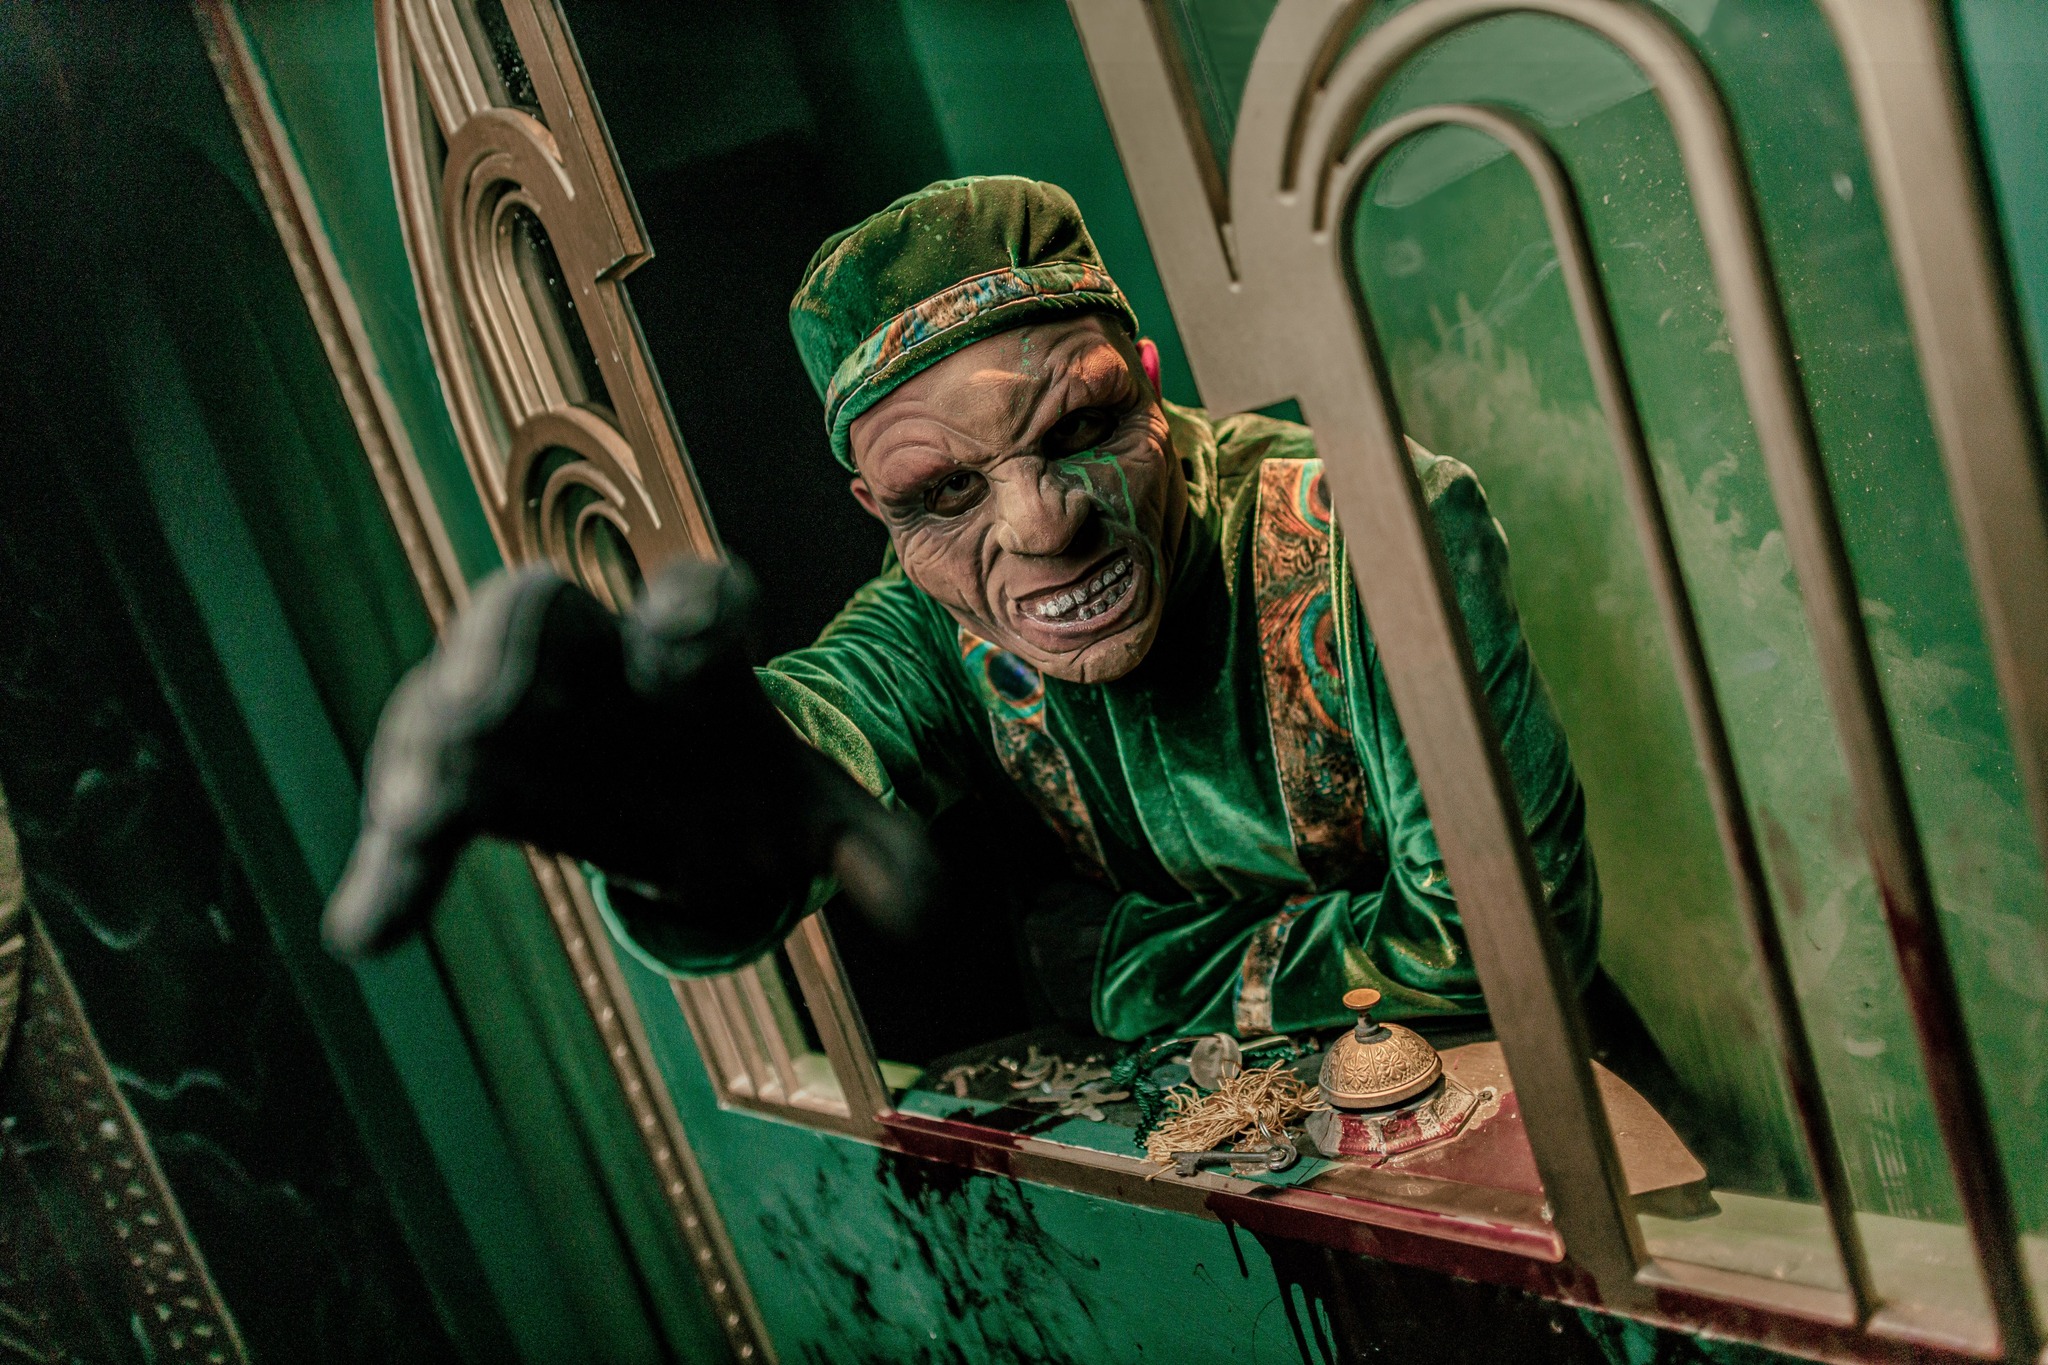 The angry bellhop at Knott's Scary Farm